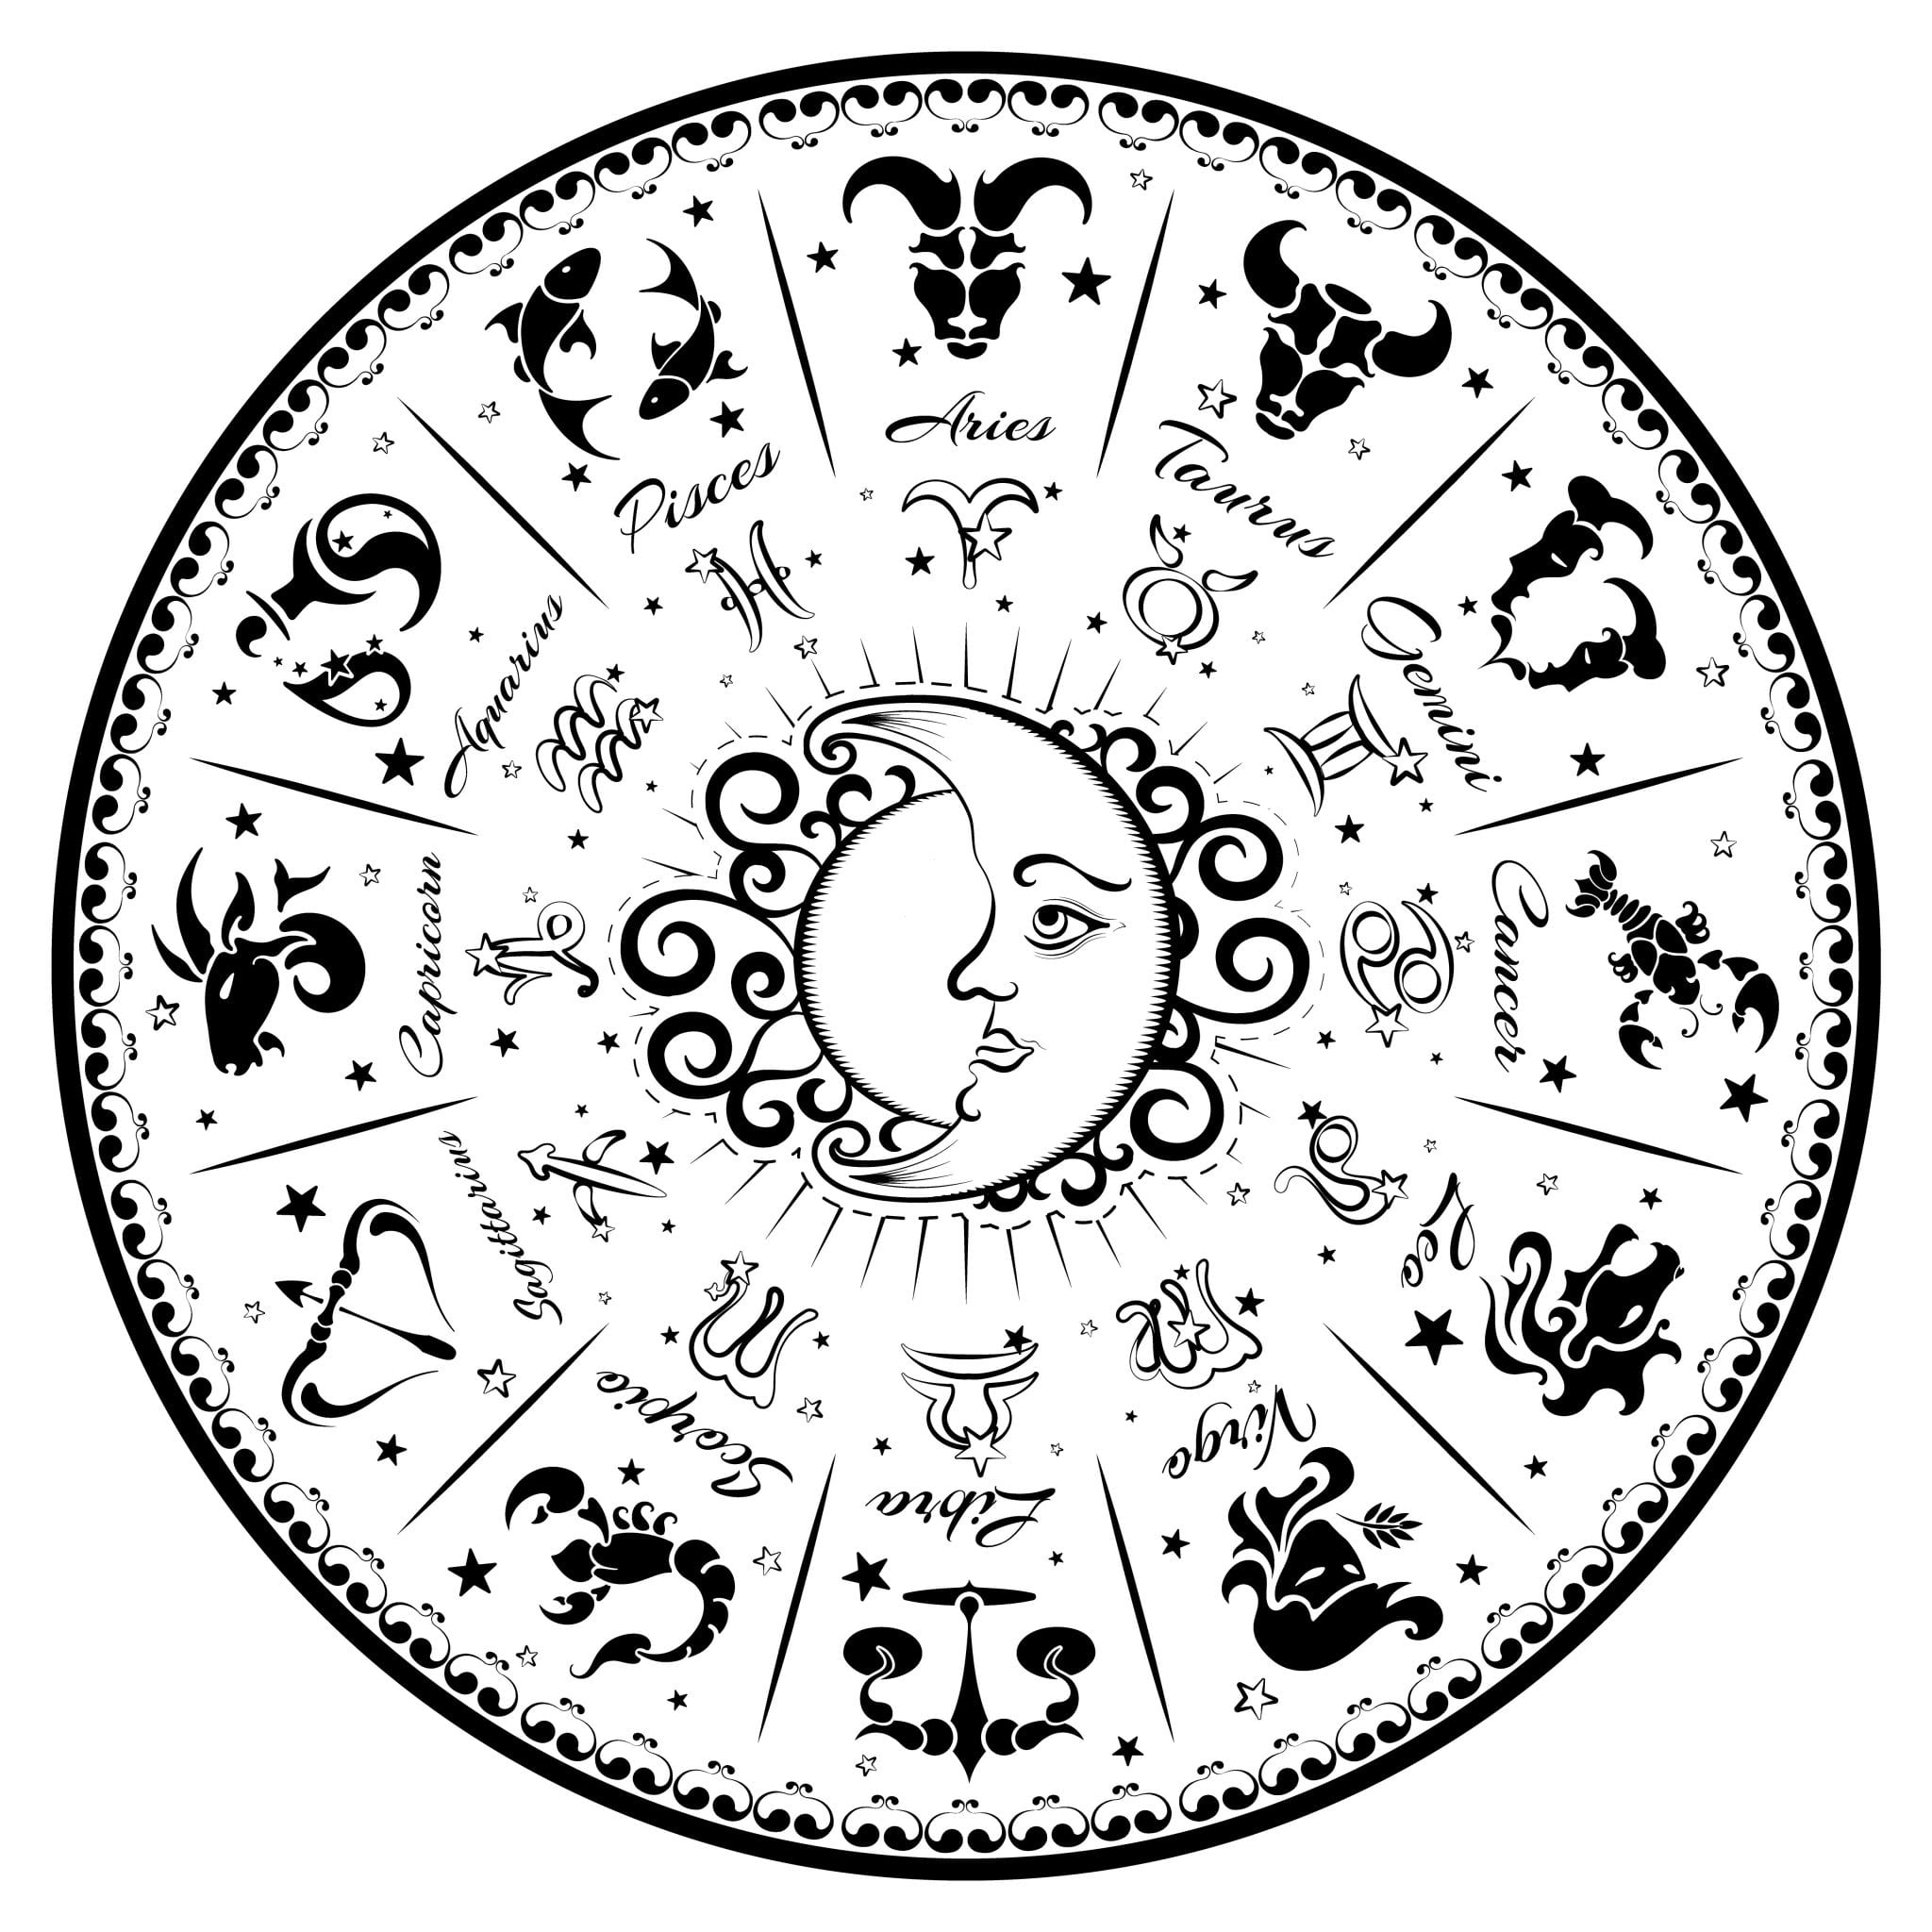 astrology 2019 by moon sign